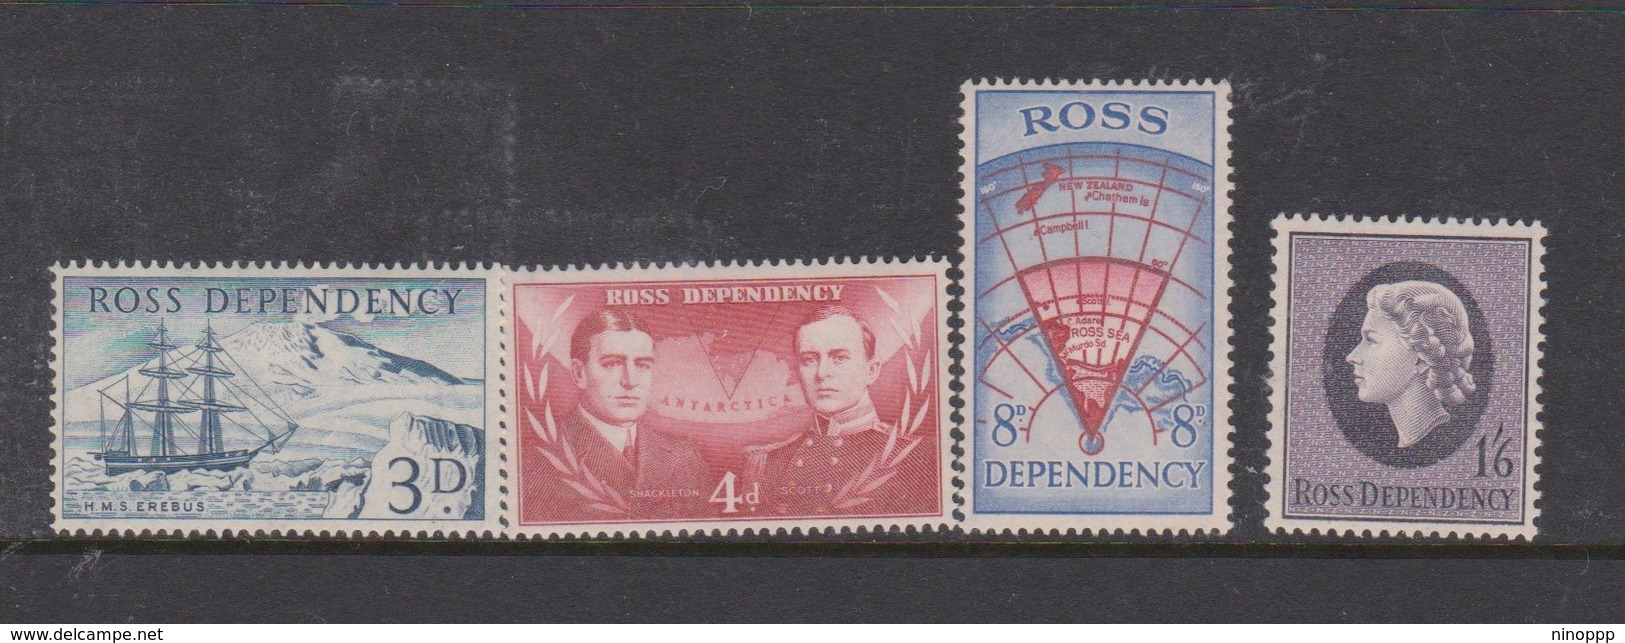 Ross Dependency S 1-4 1957 Definitive, Mint Hinged - Unused Stamps